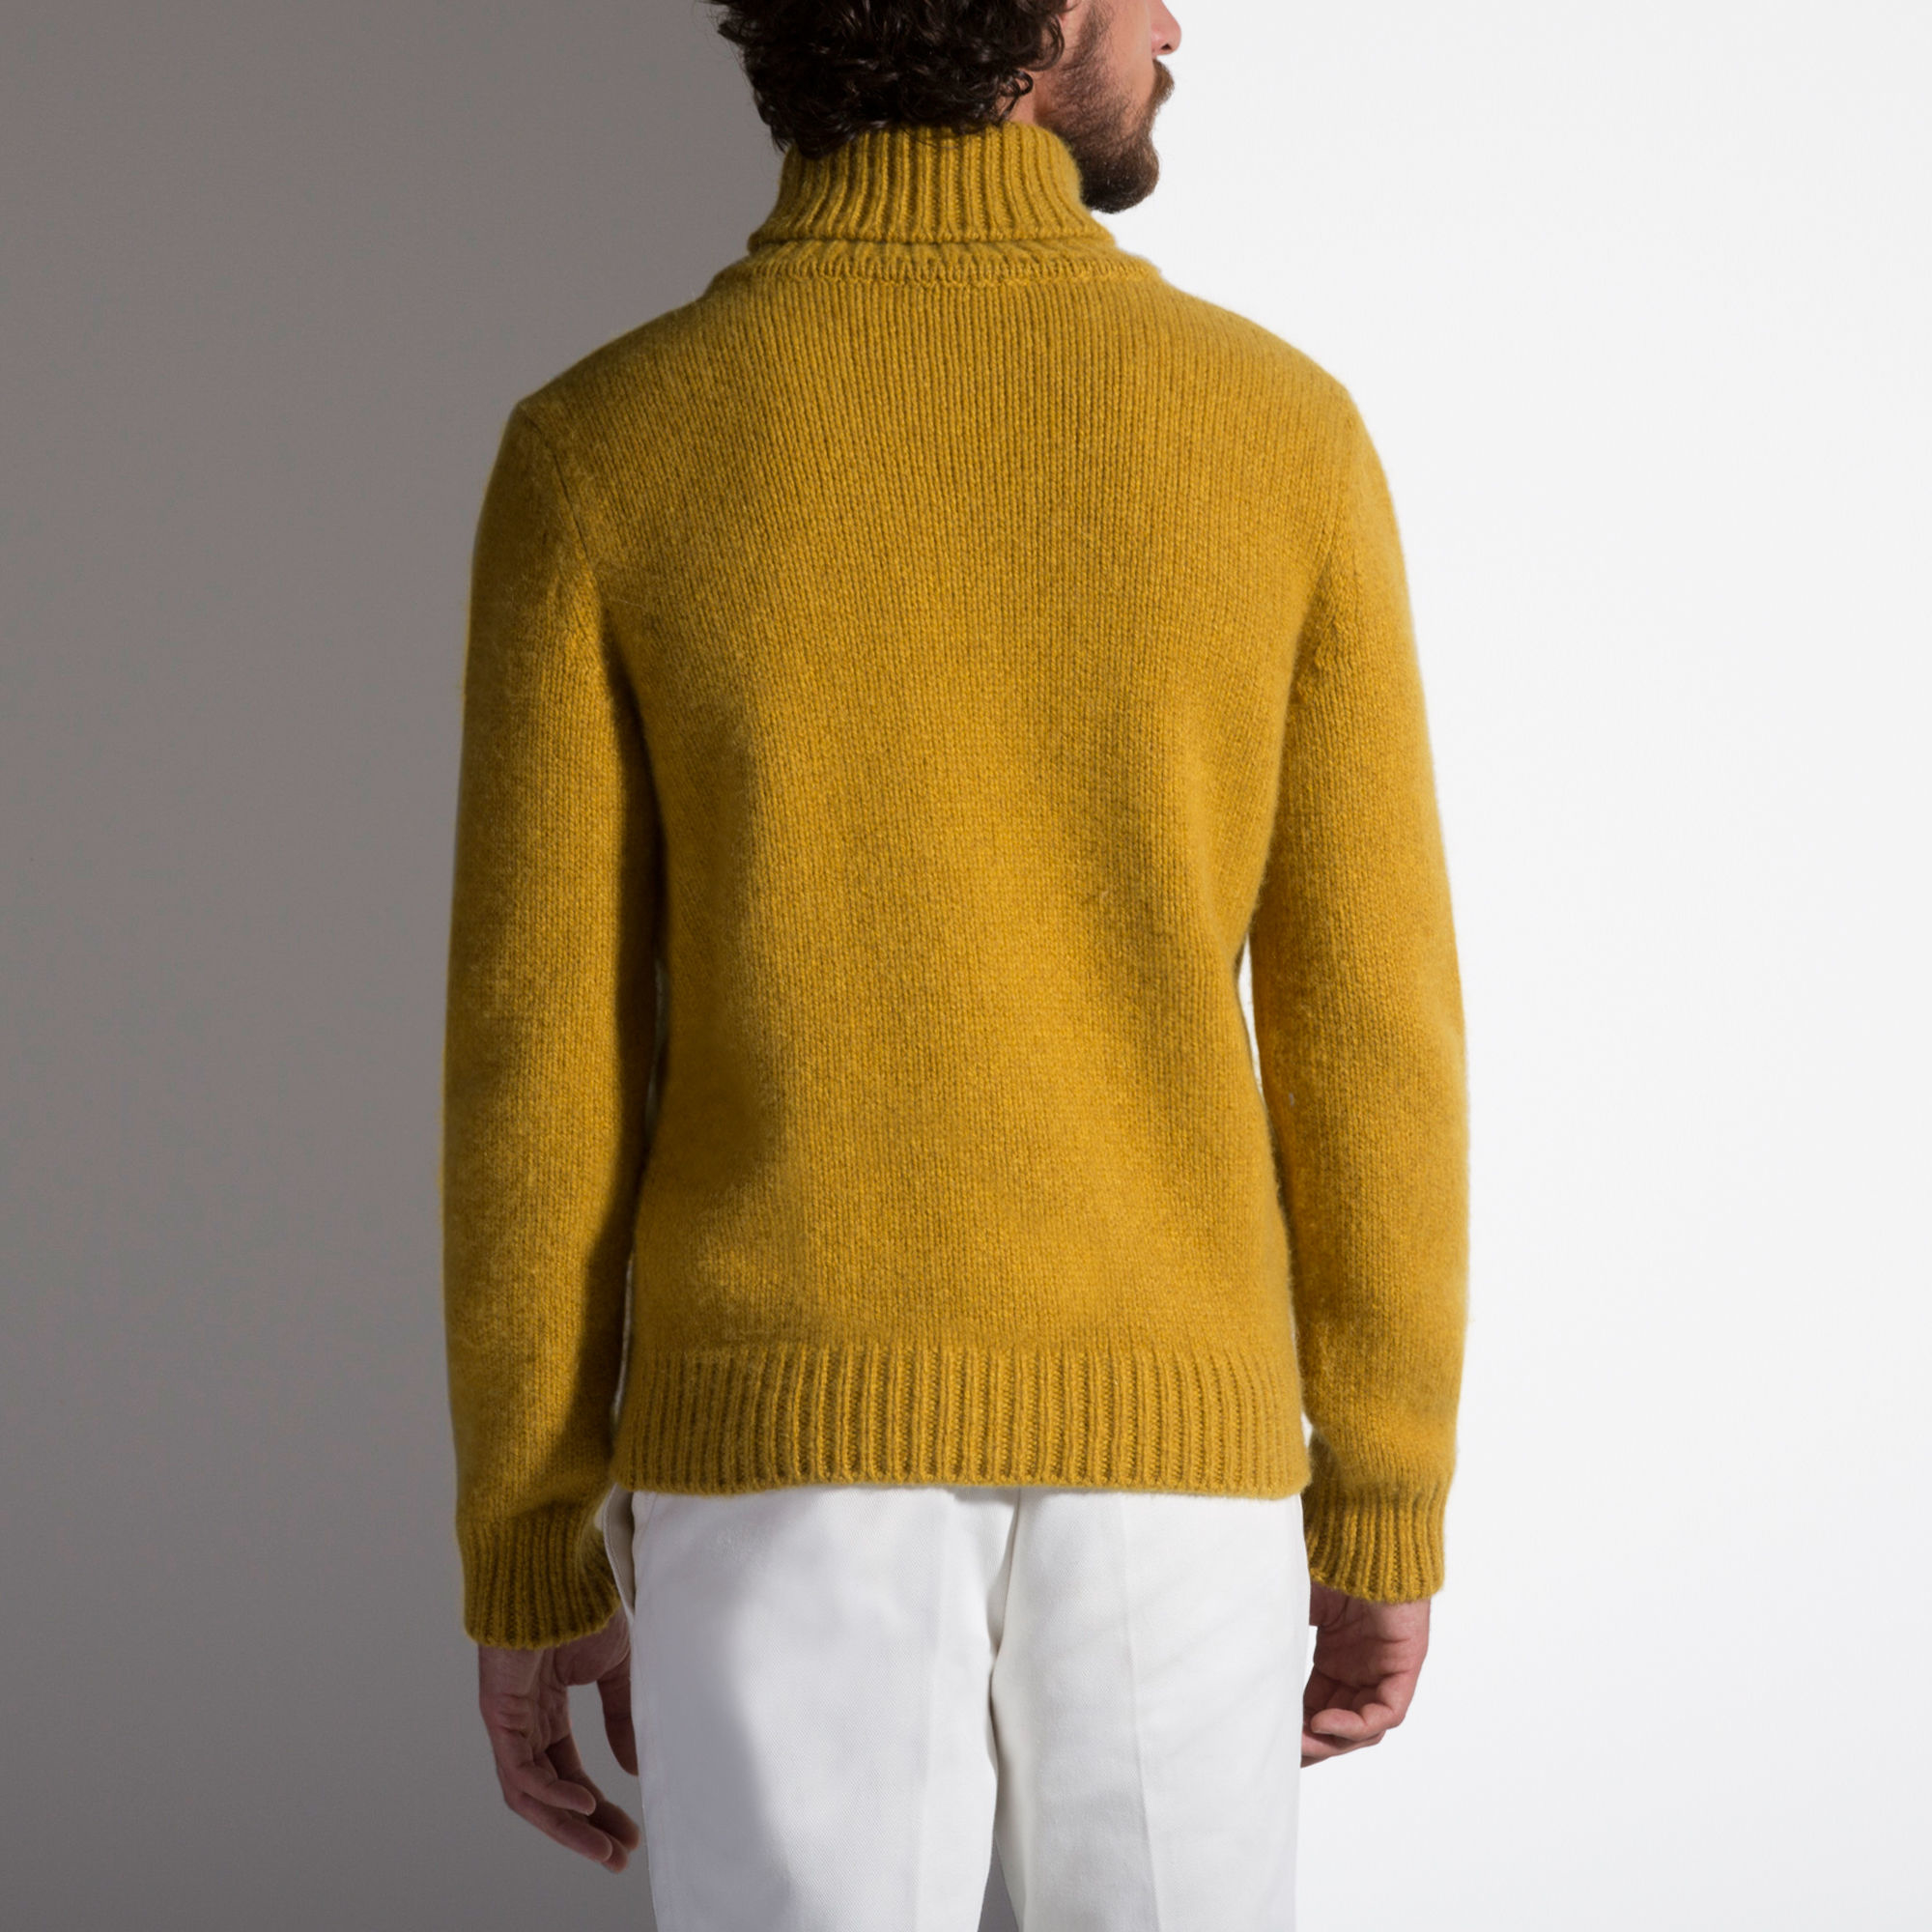 Lyst - Bally Cashmere Polo Neck in Yellow for Men